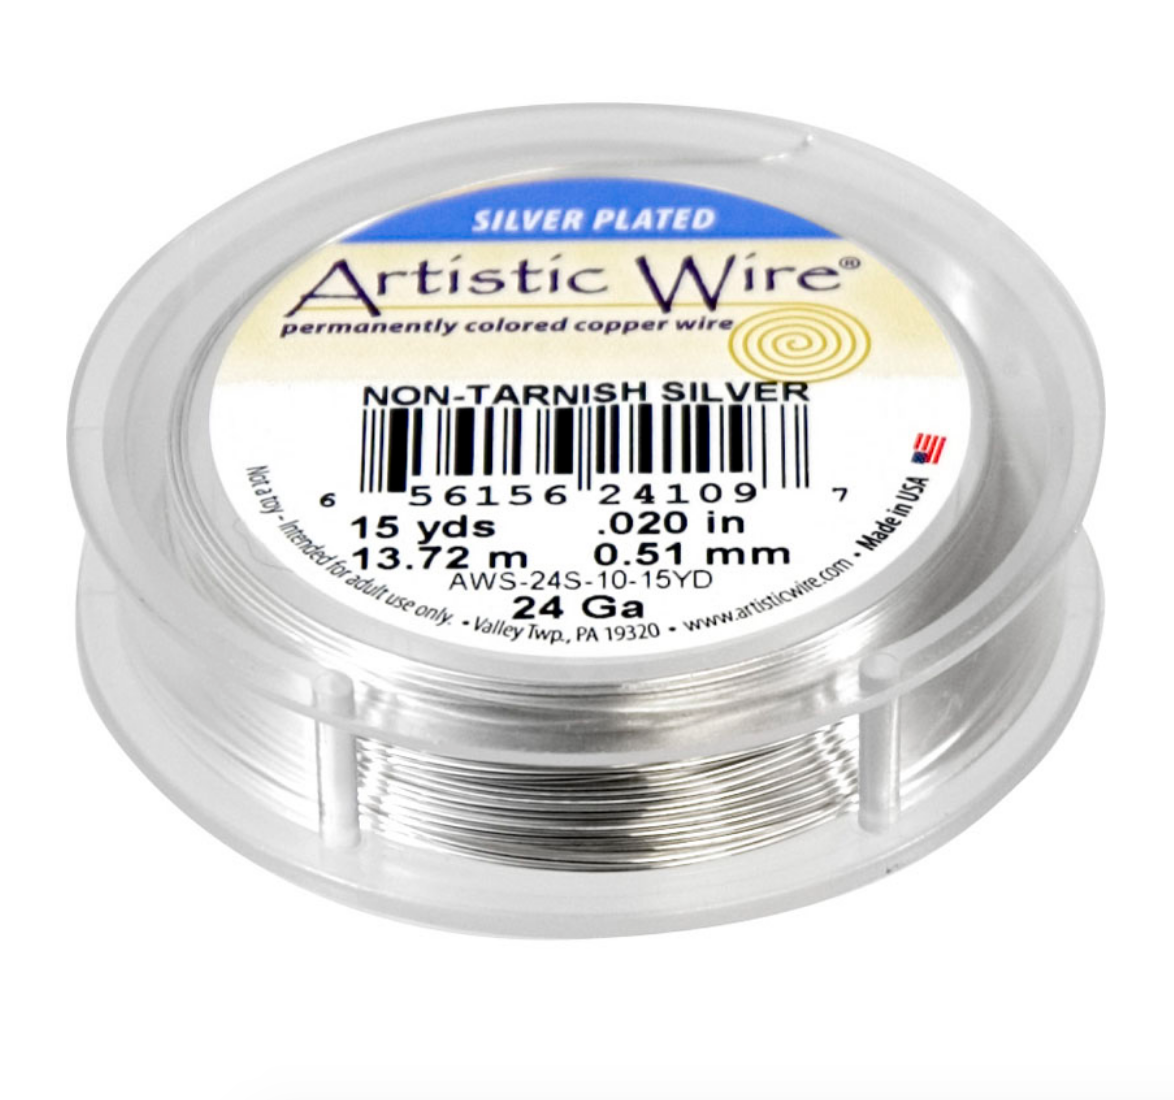 Artistic Wire, Silver Plated Craft Wire 18 Gauge Thick, 4 Yard Spool, Rose Gold Color